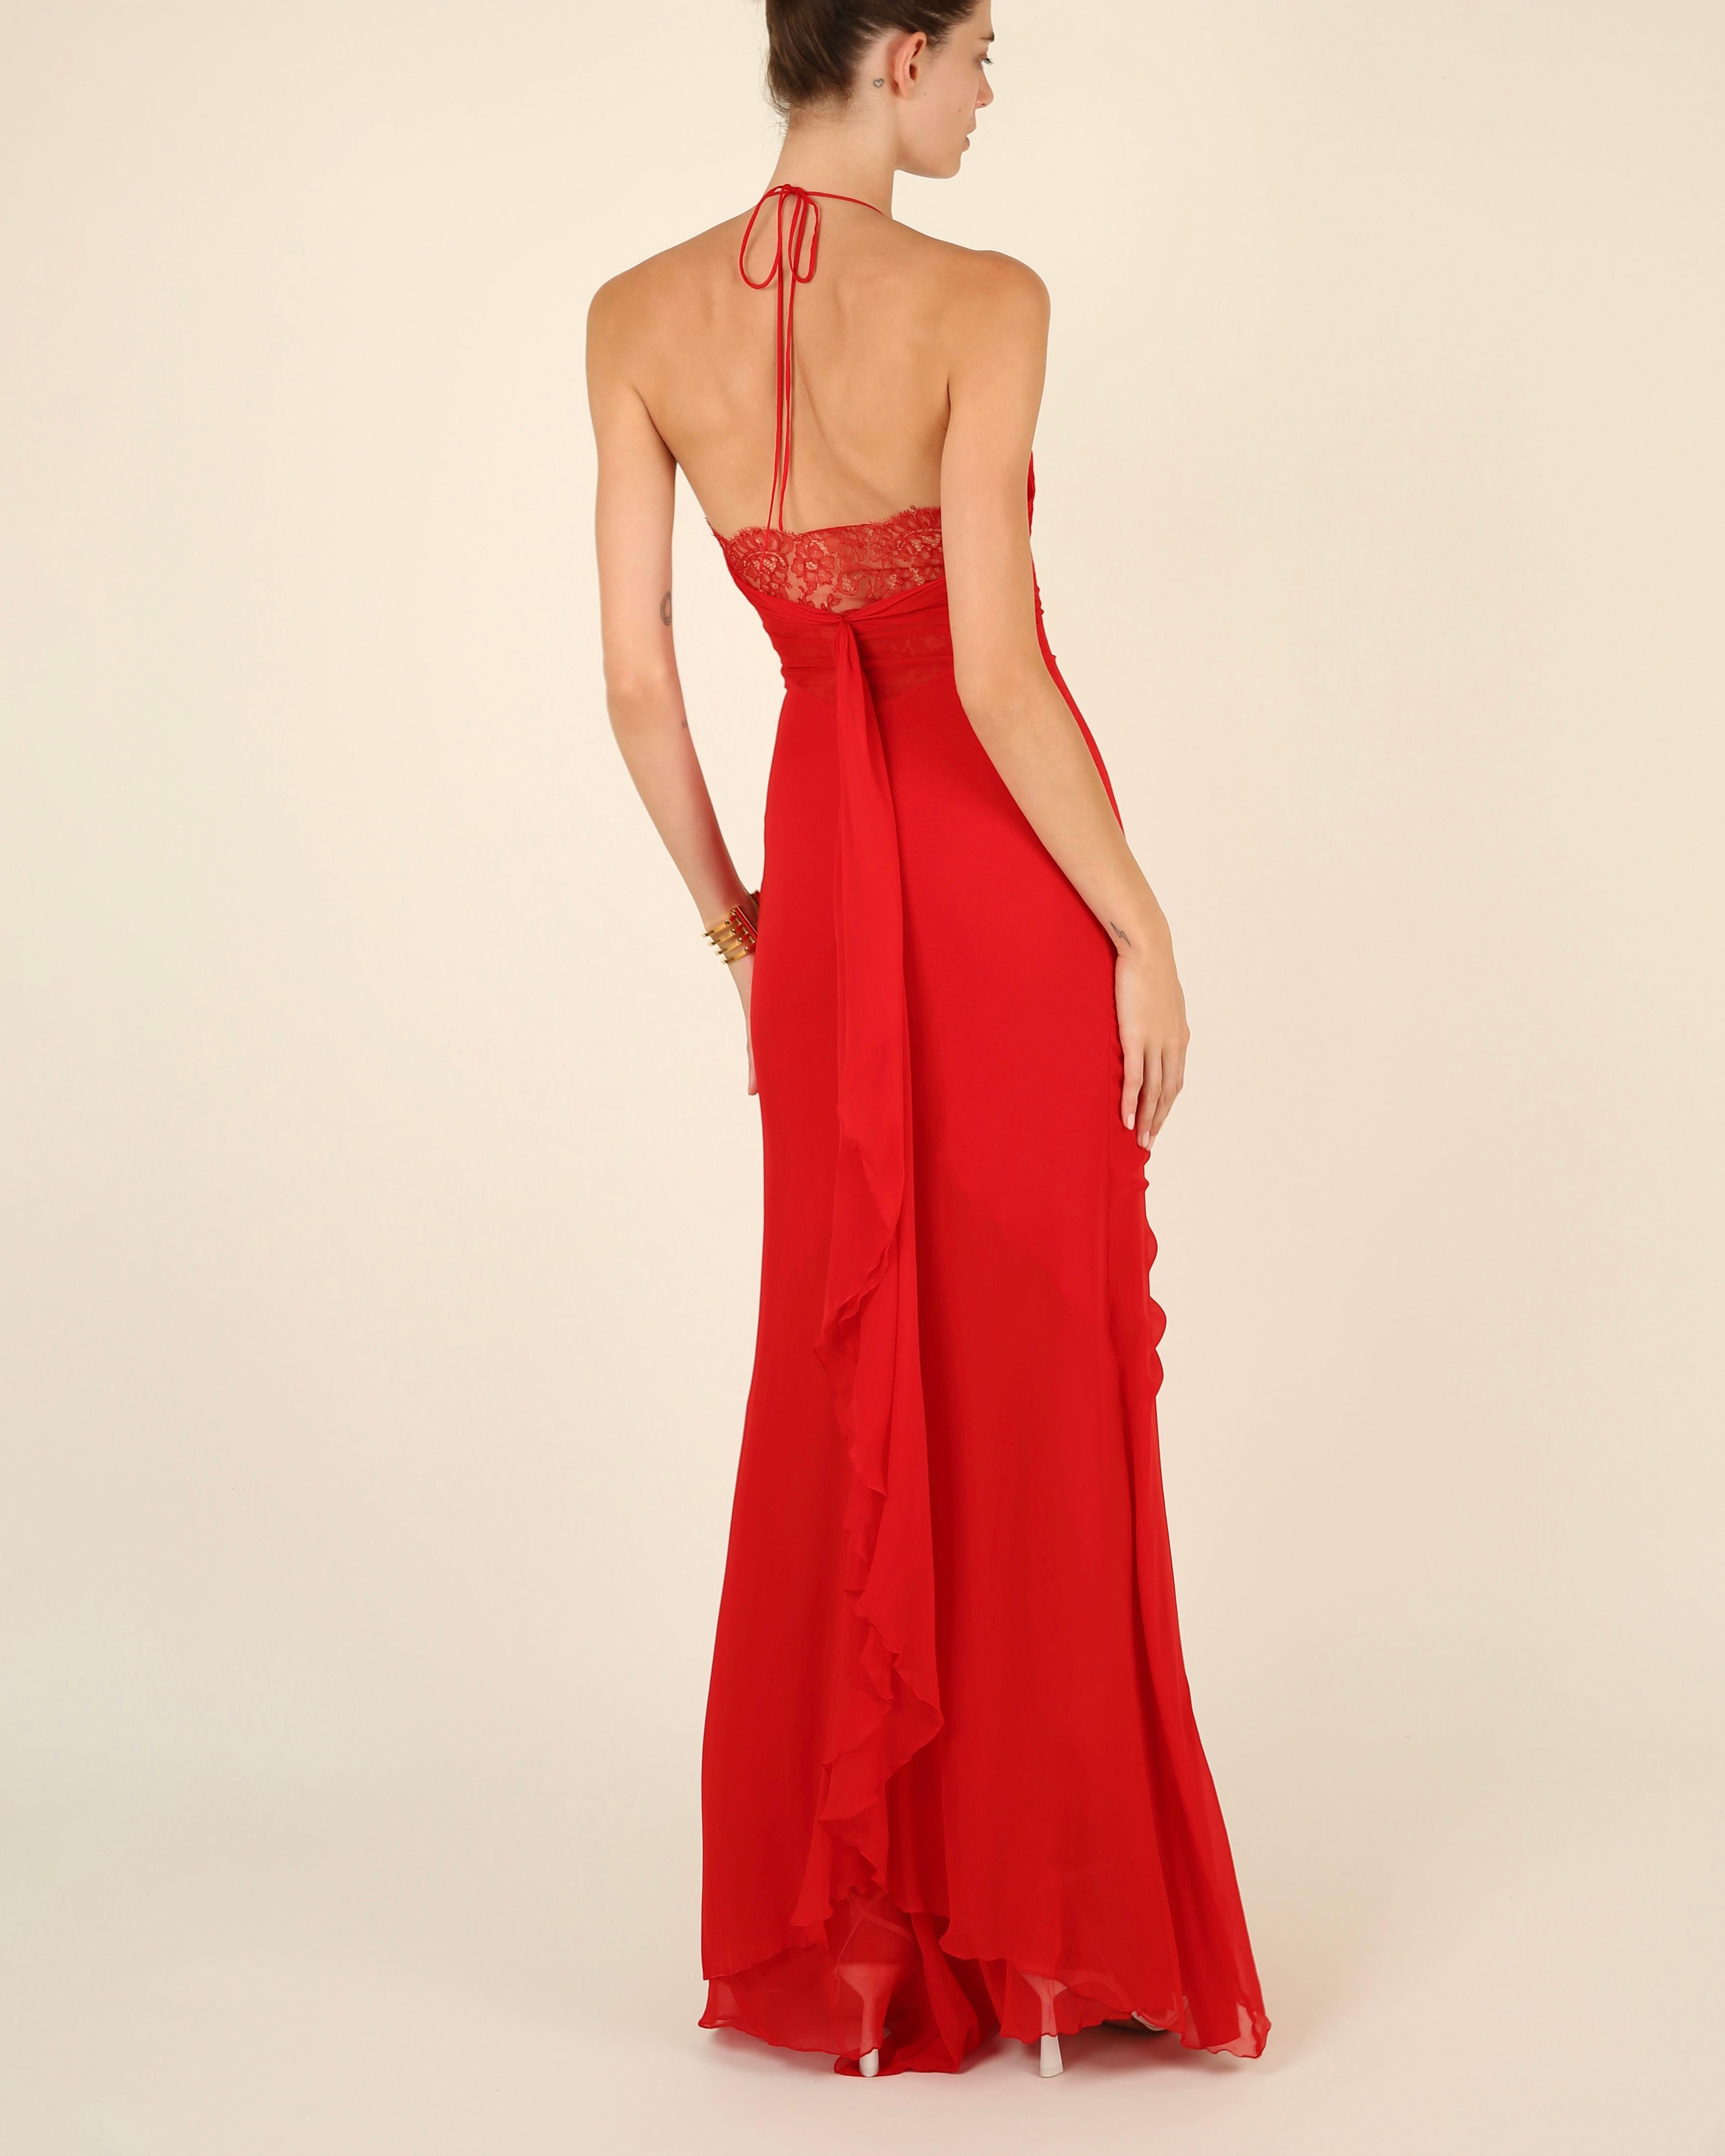 Valentino 1990's vintage red silk lace halter slip style gown dress IT 38 - 40 11